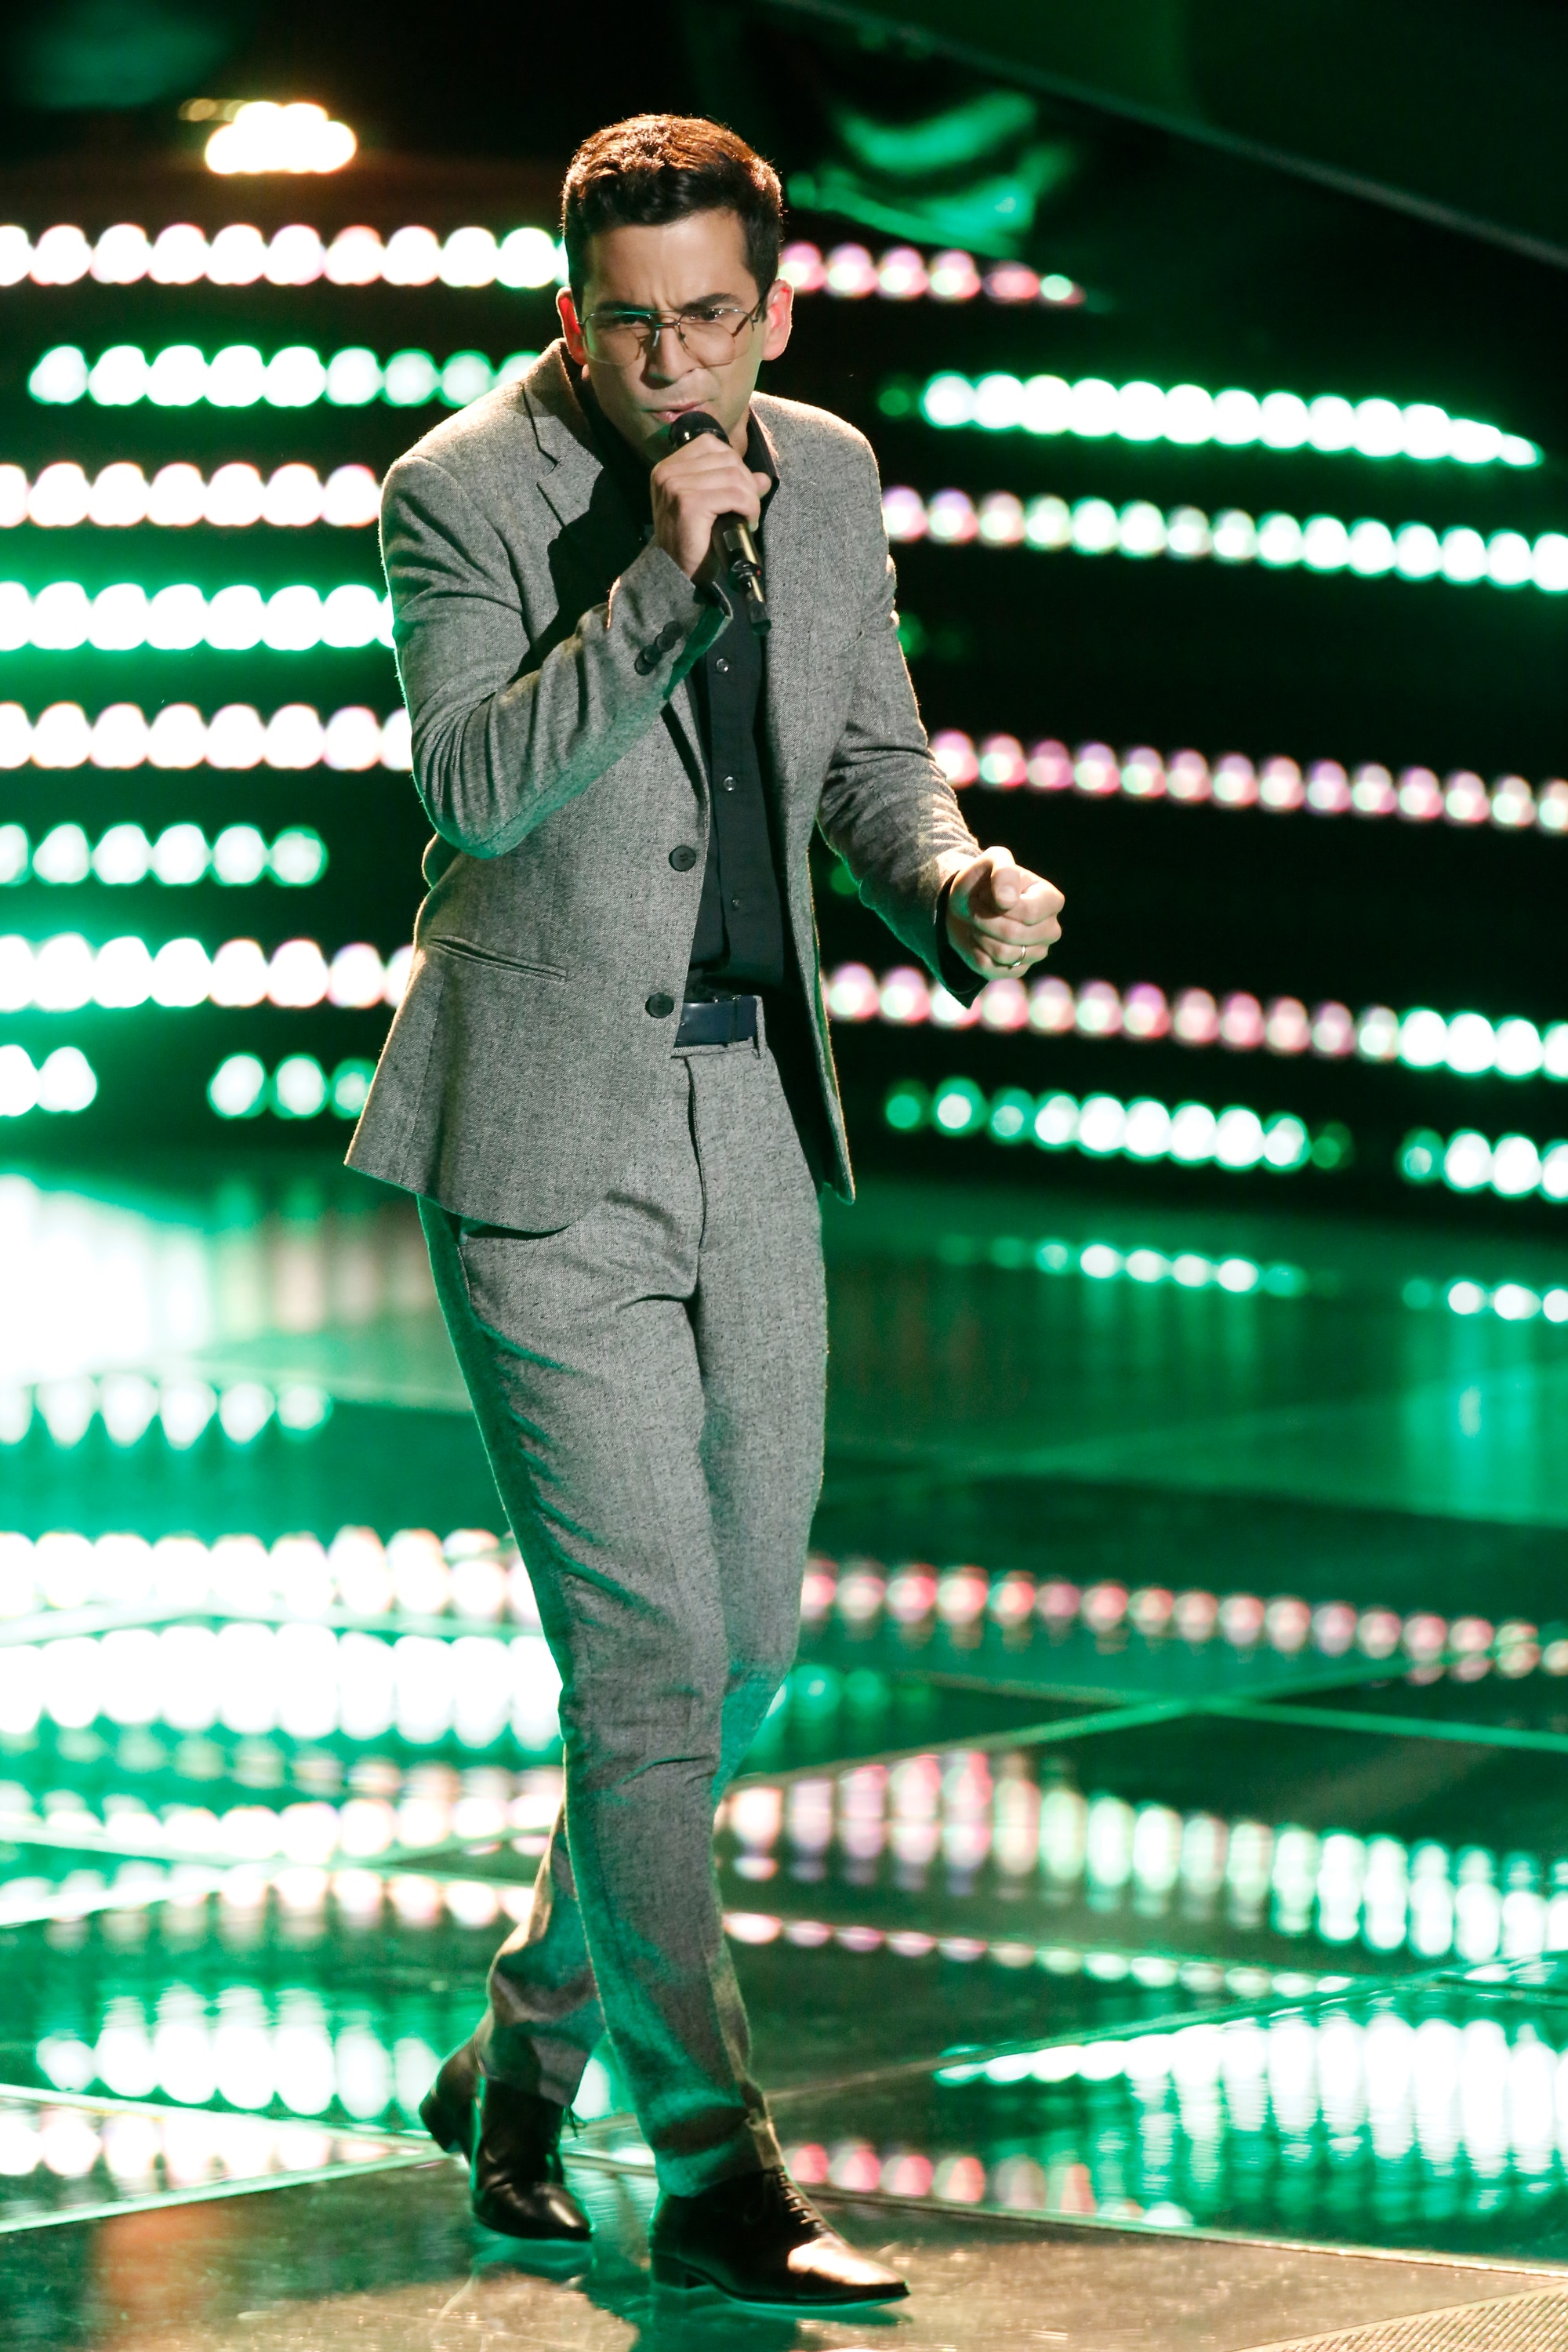 The Voice The Blind Auditions, Part 4 Photo 2926415